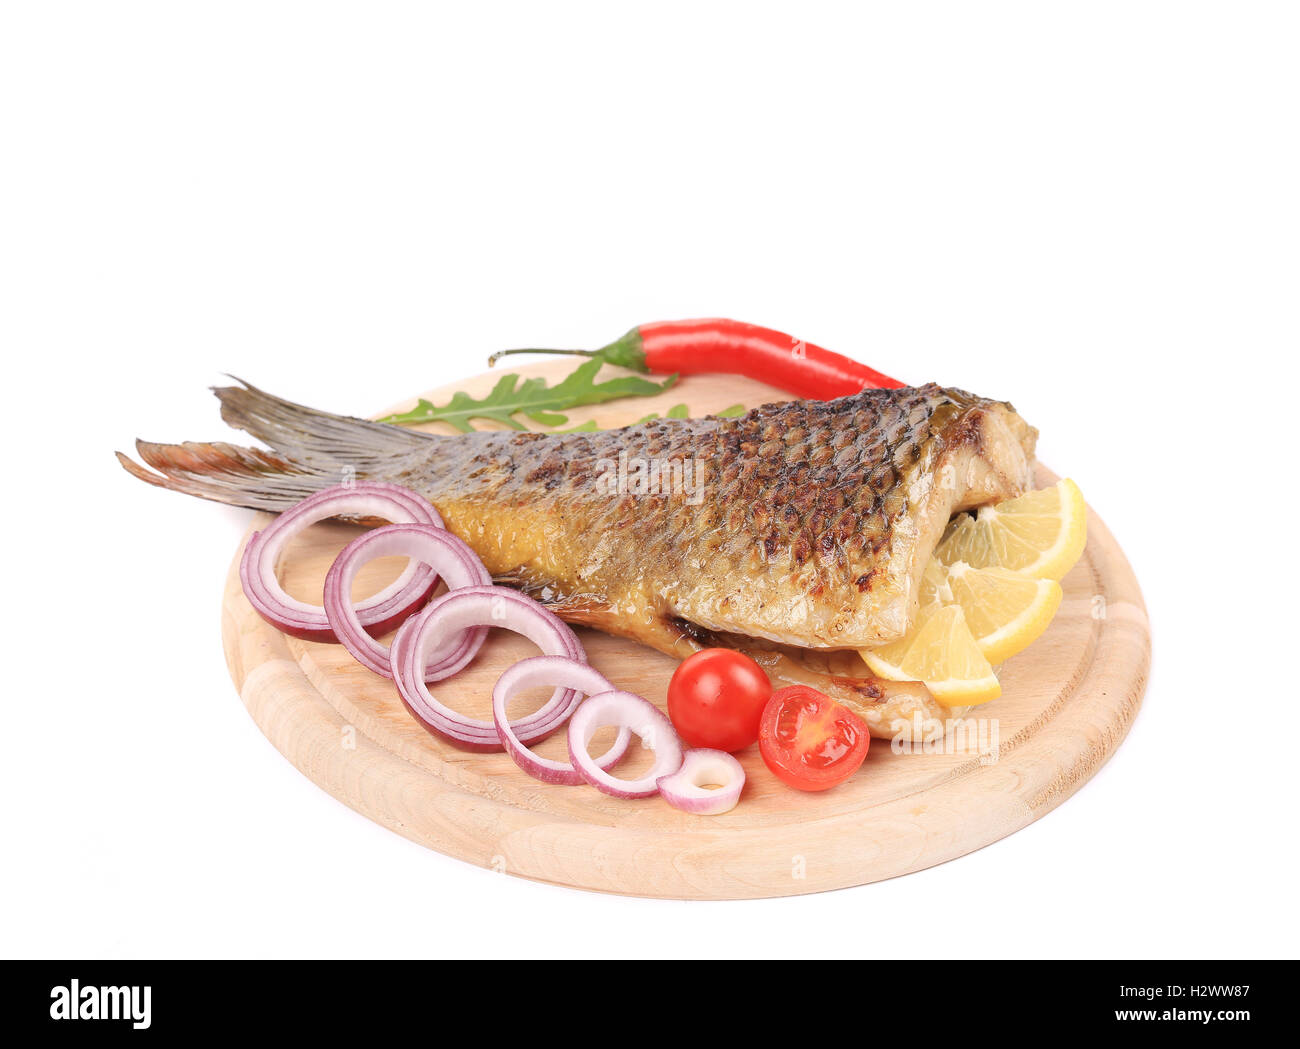 Grilled fish with vegetables. Stock Photo